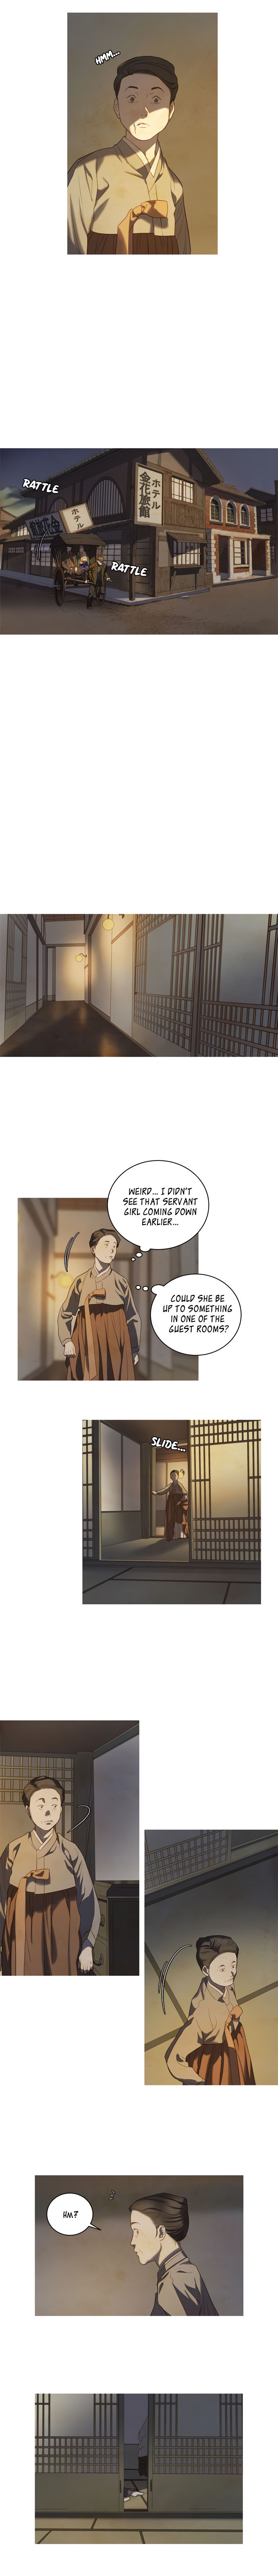 Gorae Byul - The Gyeongseong Mermaid - Chapter 7 Page 15